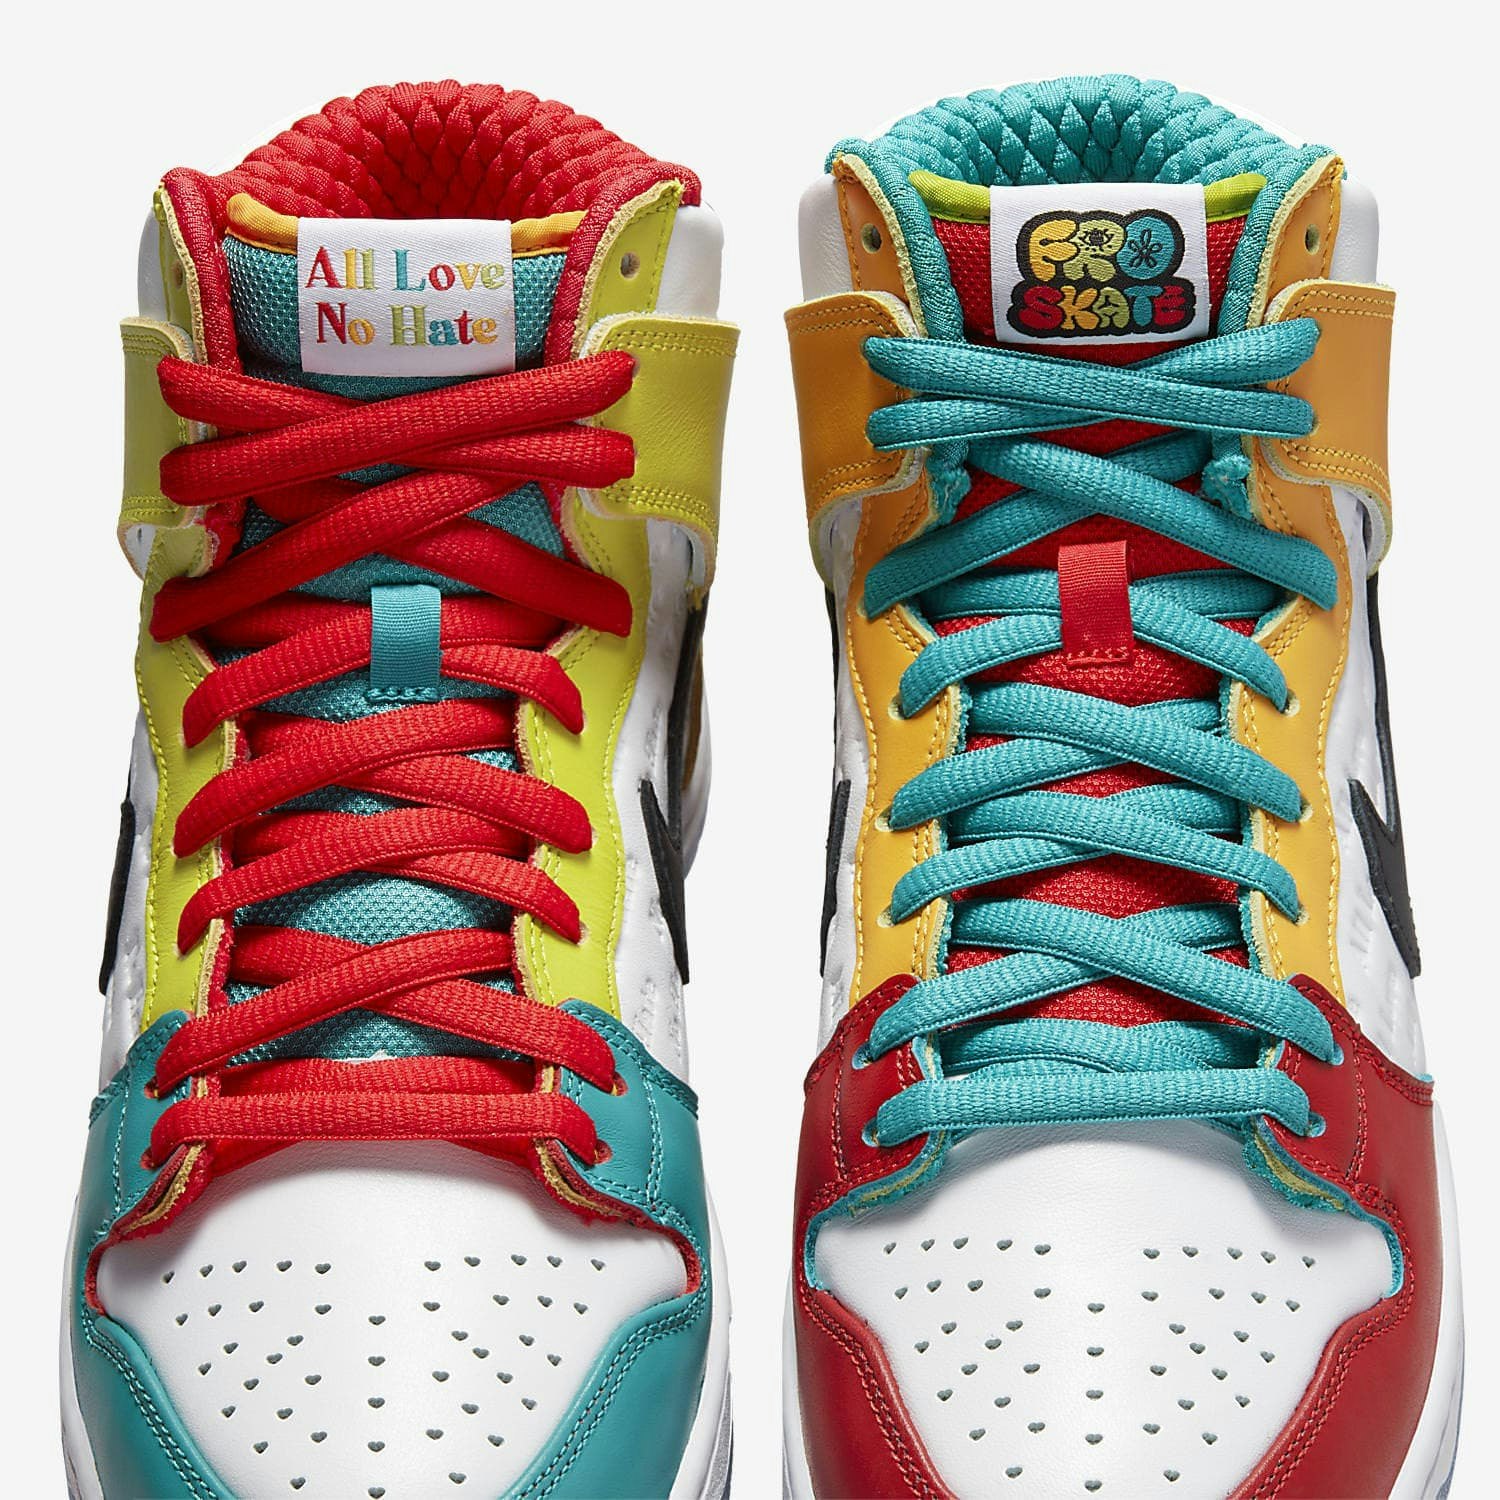 FroSkate x Nike SB Dunk High “All Love No Hate”